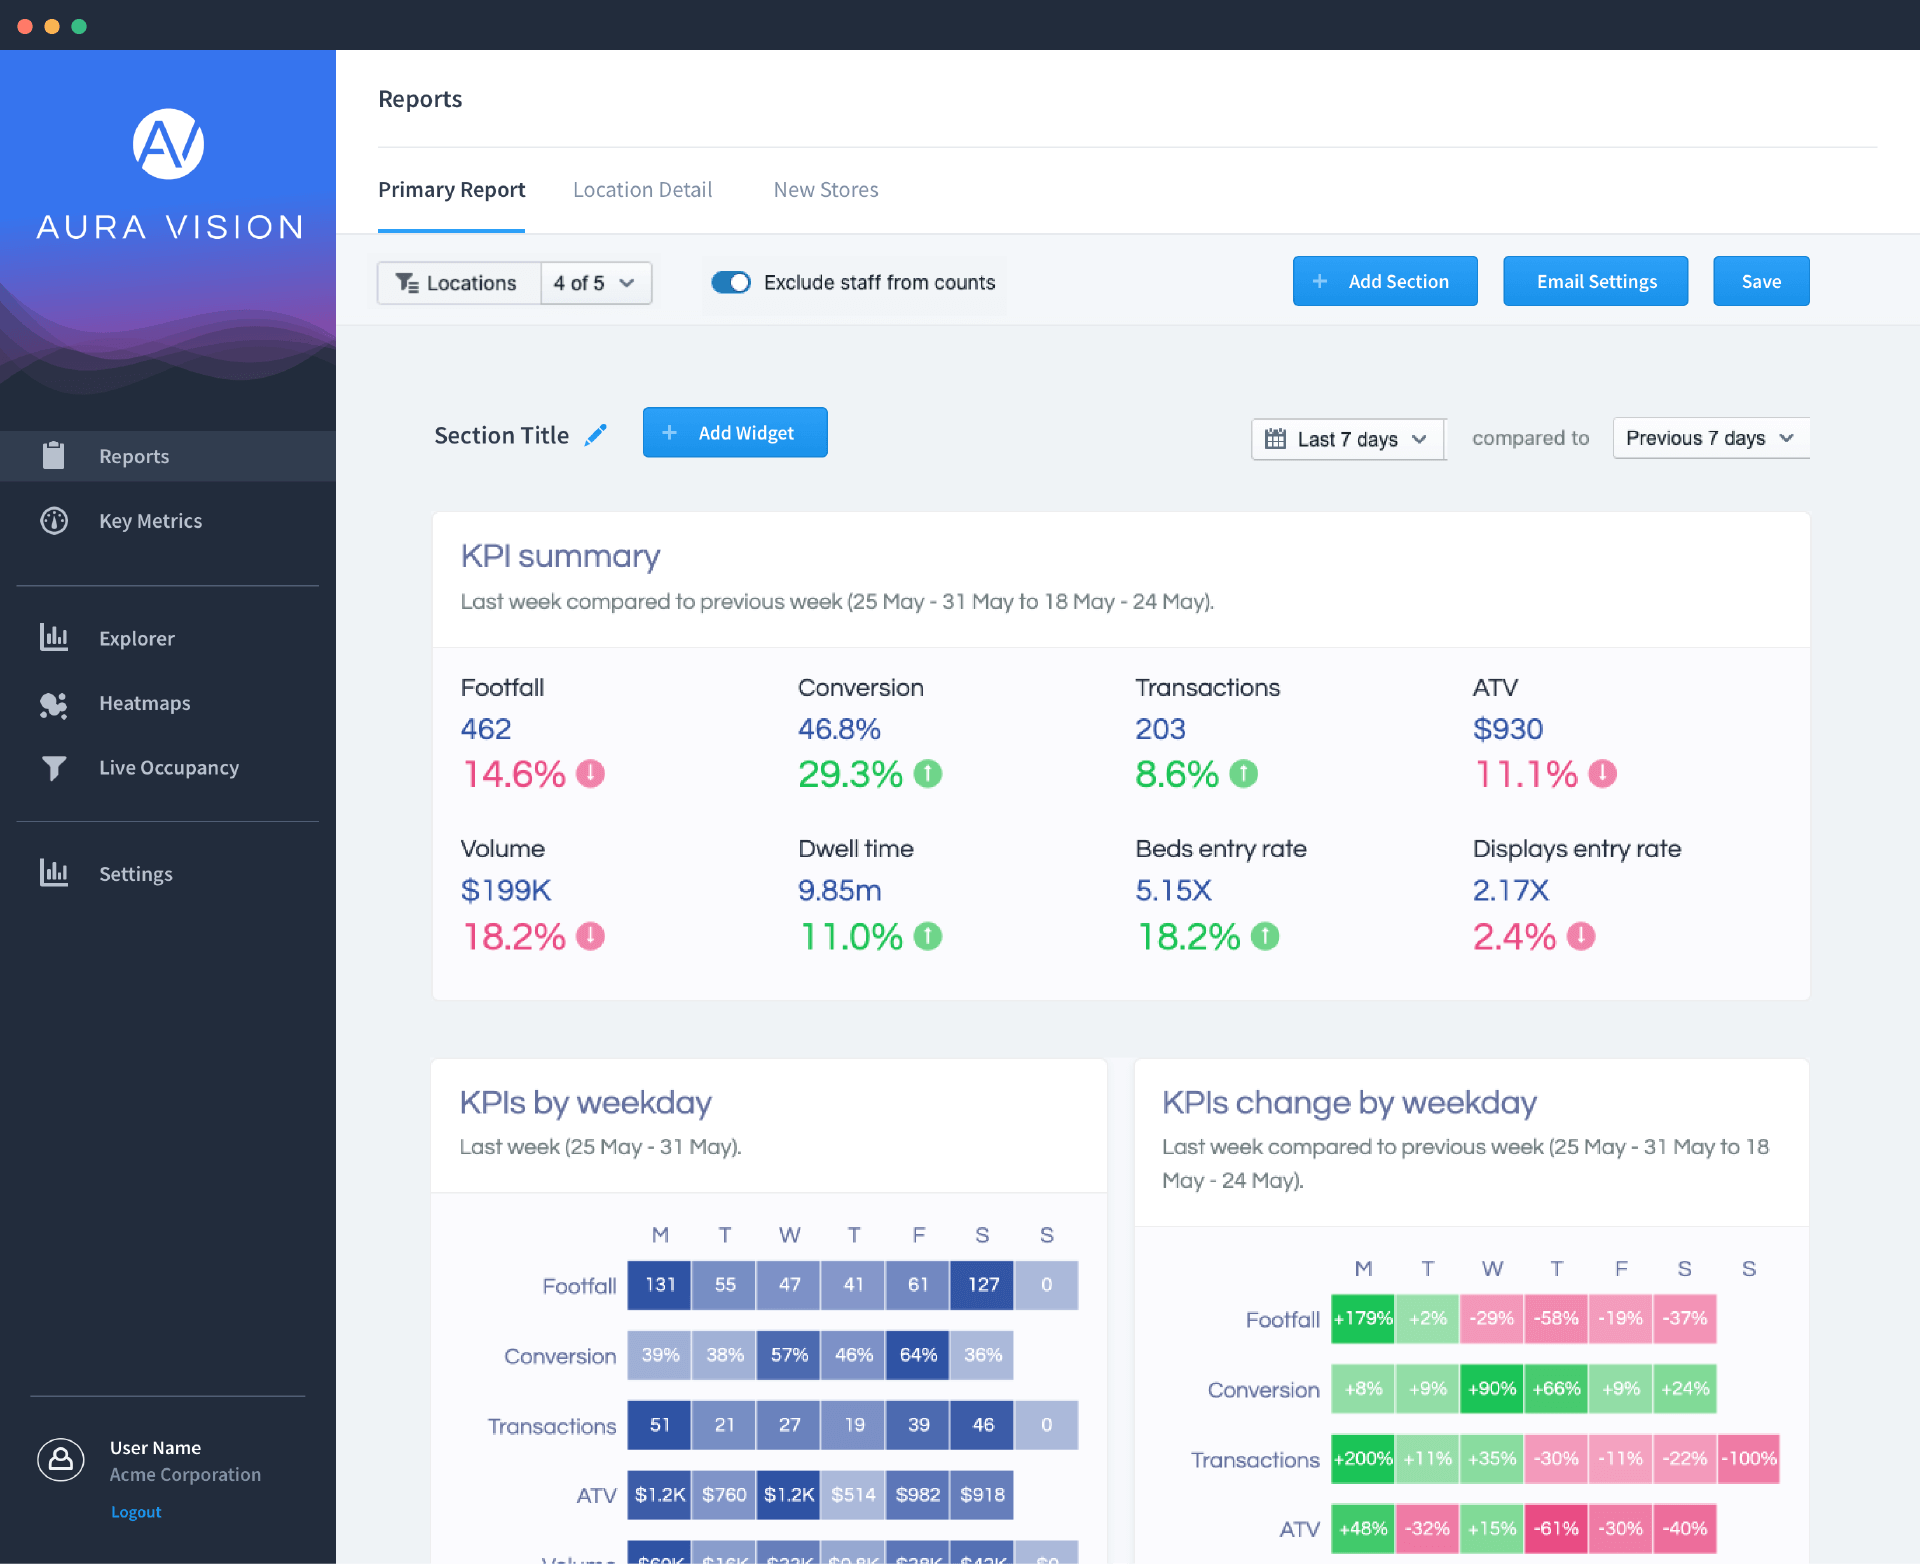 The Aura Vision dashboard, showing analytics from the last 7 days